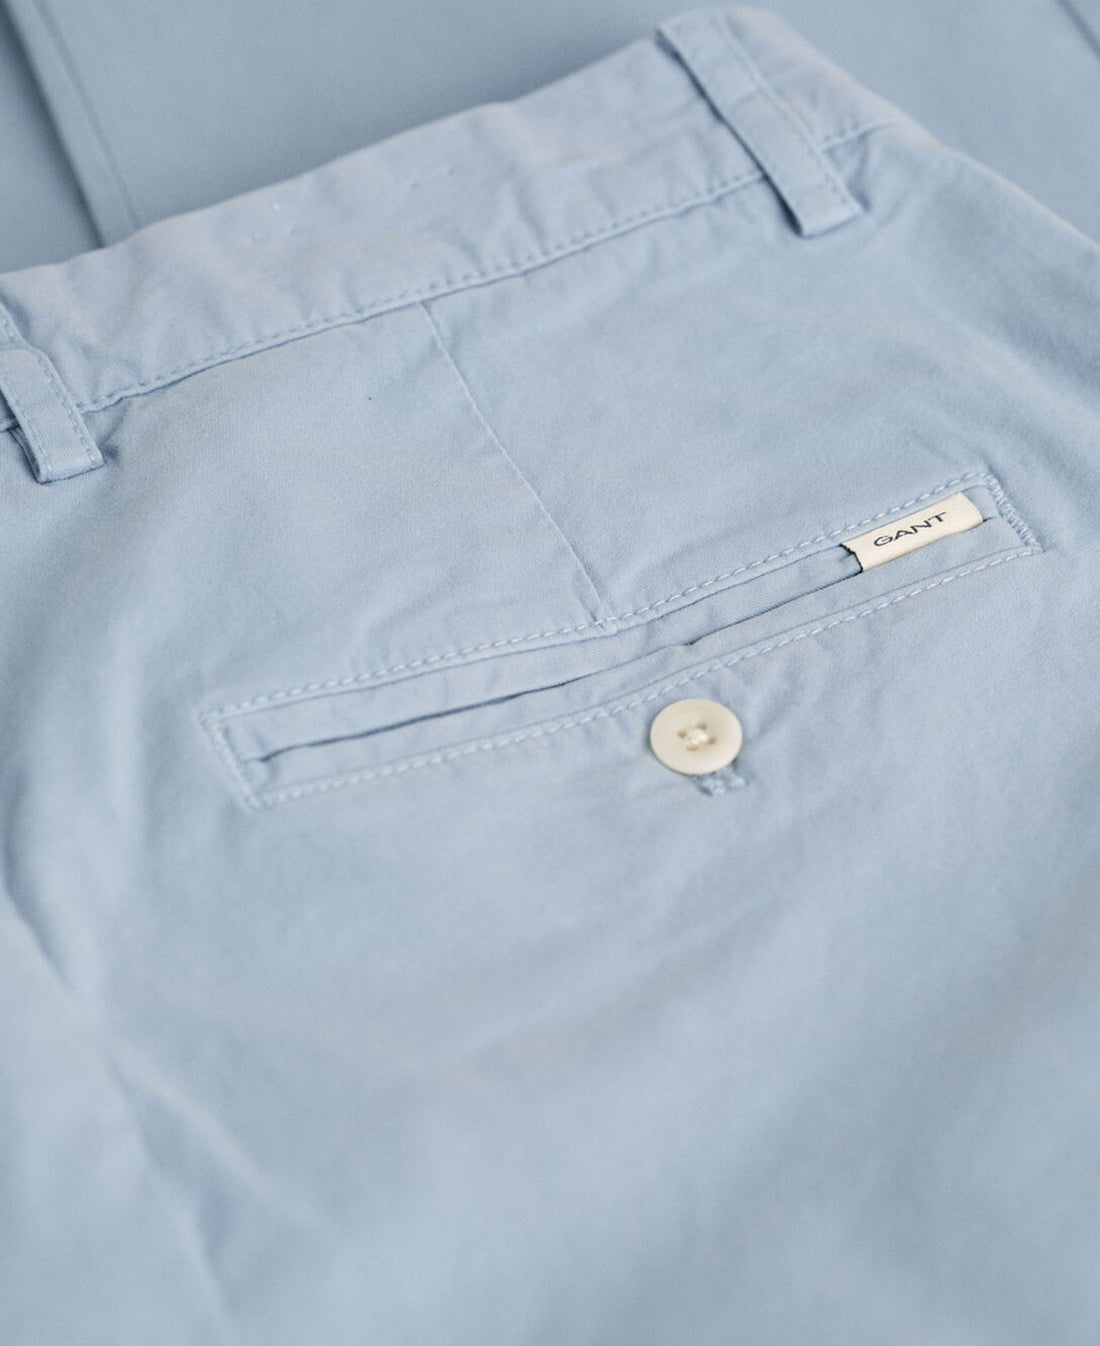 Slim Fit Sunfaded Chinos - Dove Blue